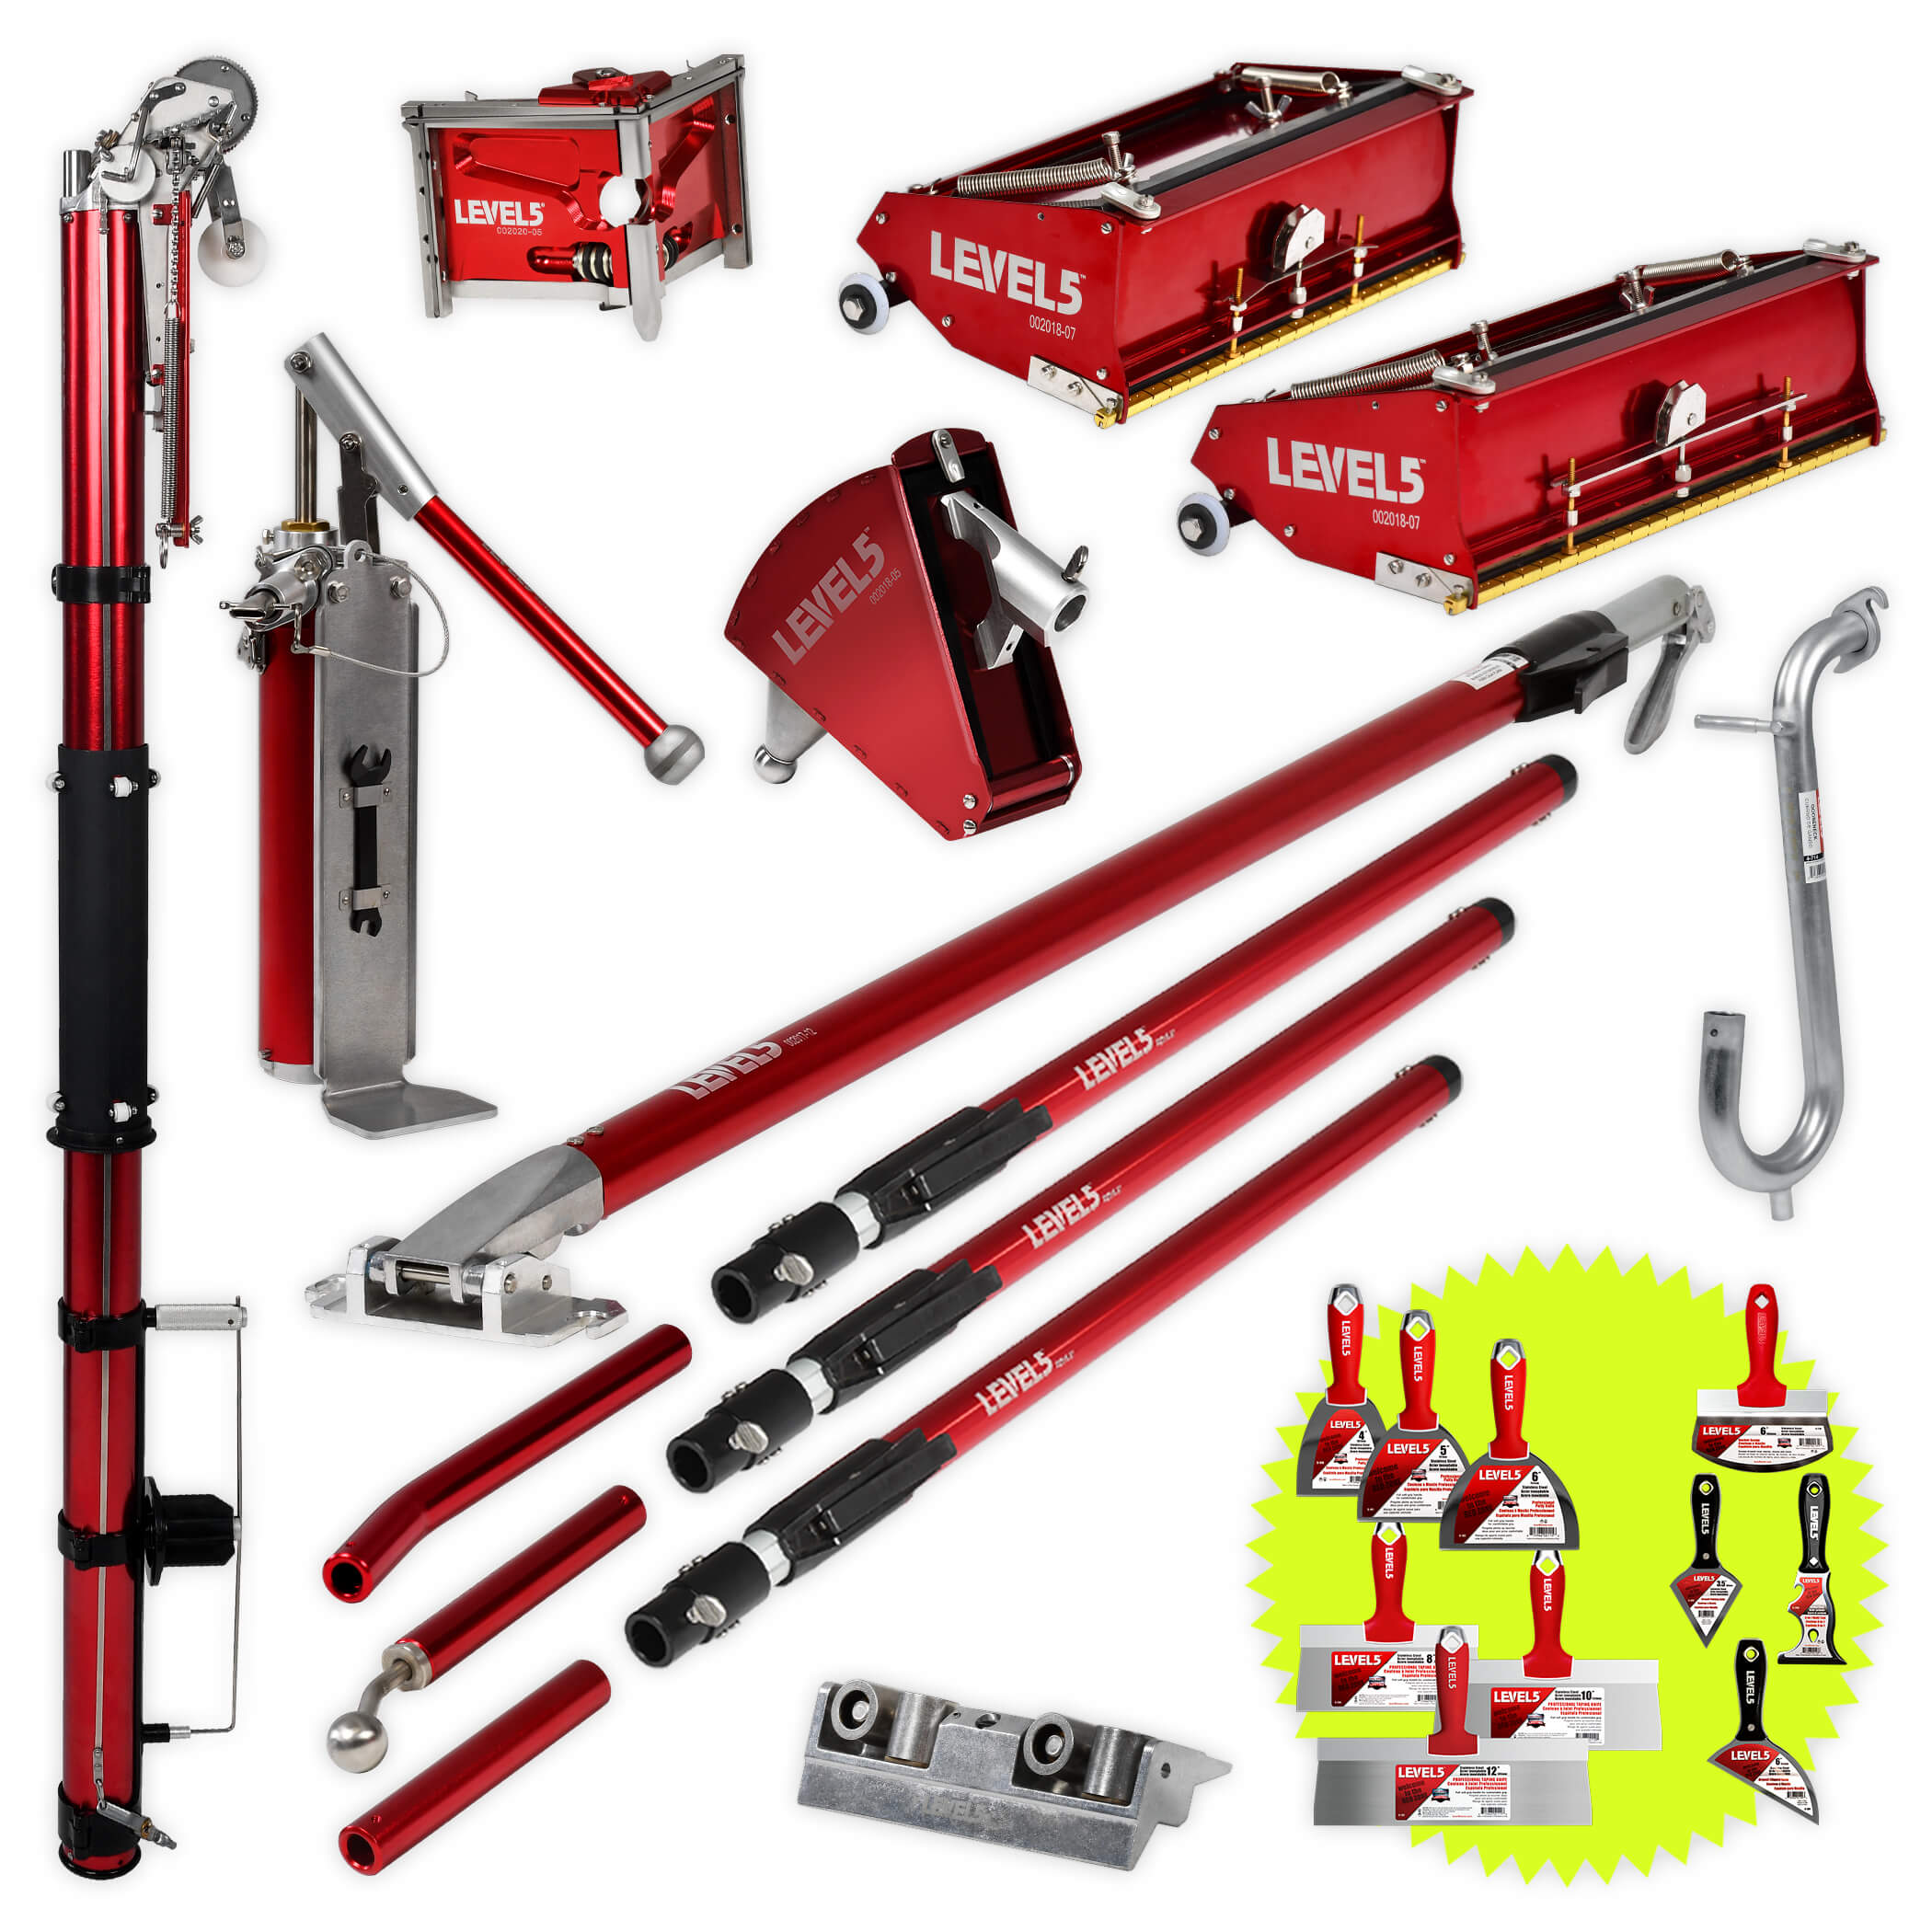 Level 5 Automatic Taping Tool Set With Bonus Tools (4-601P)